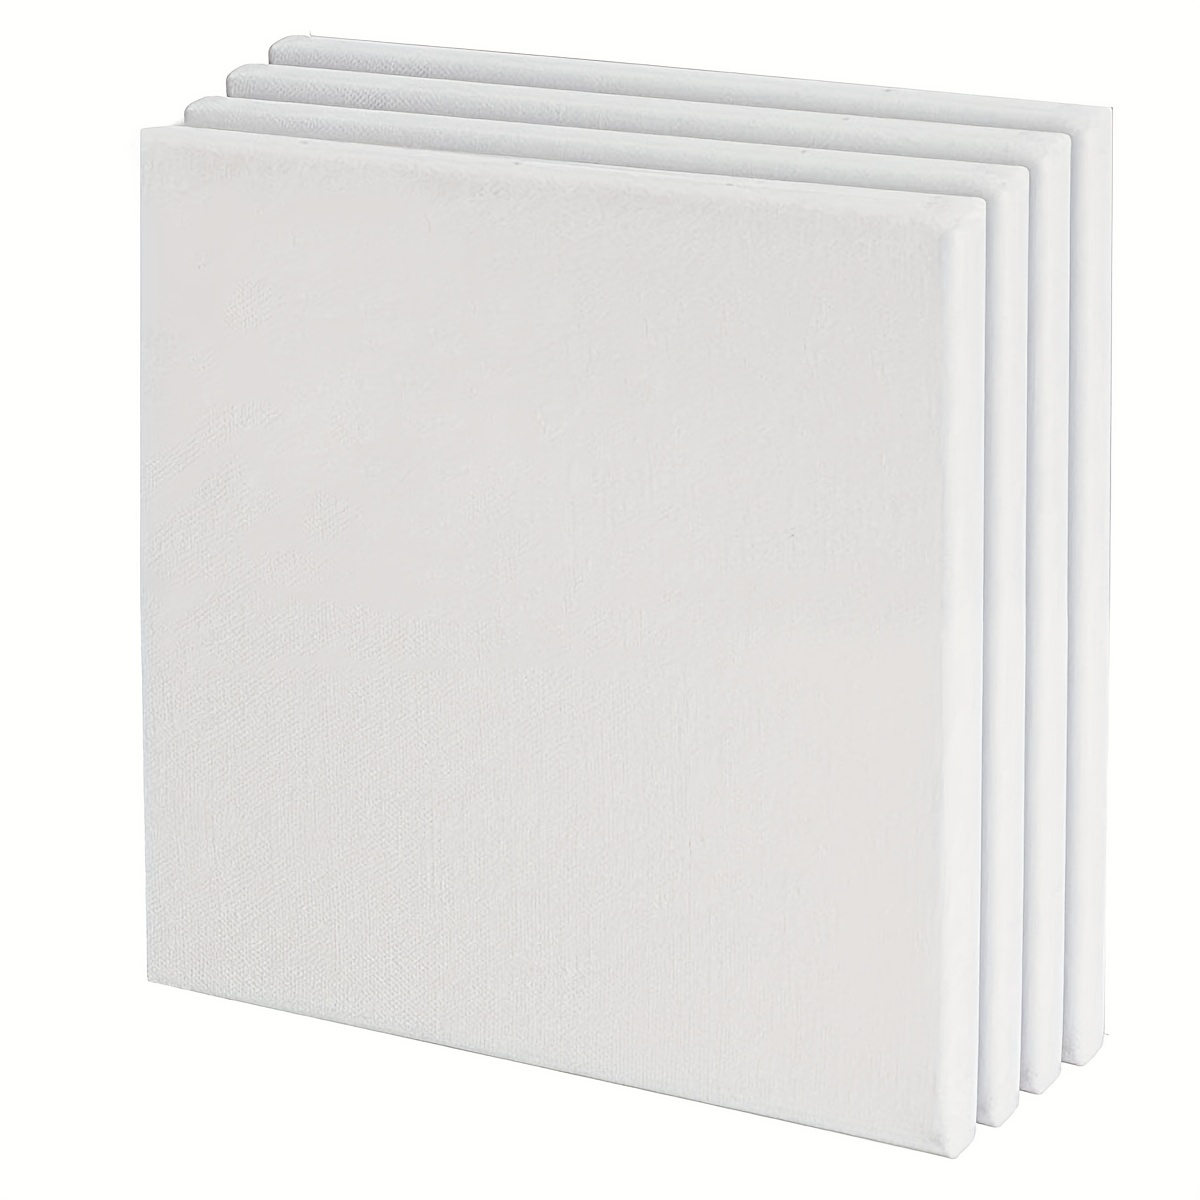 Arteza Paint Canvases For Painting, 7.8 X 7.8 Inches, Blank White Stretched  Canvas Bulk, 100% Fabric, 8 Oz Gesso-Primed, Art Supplies For Adults And T